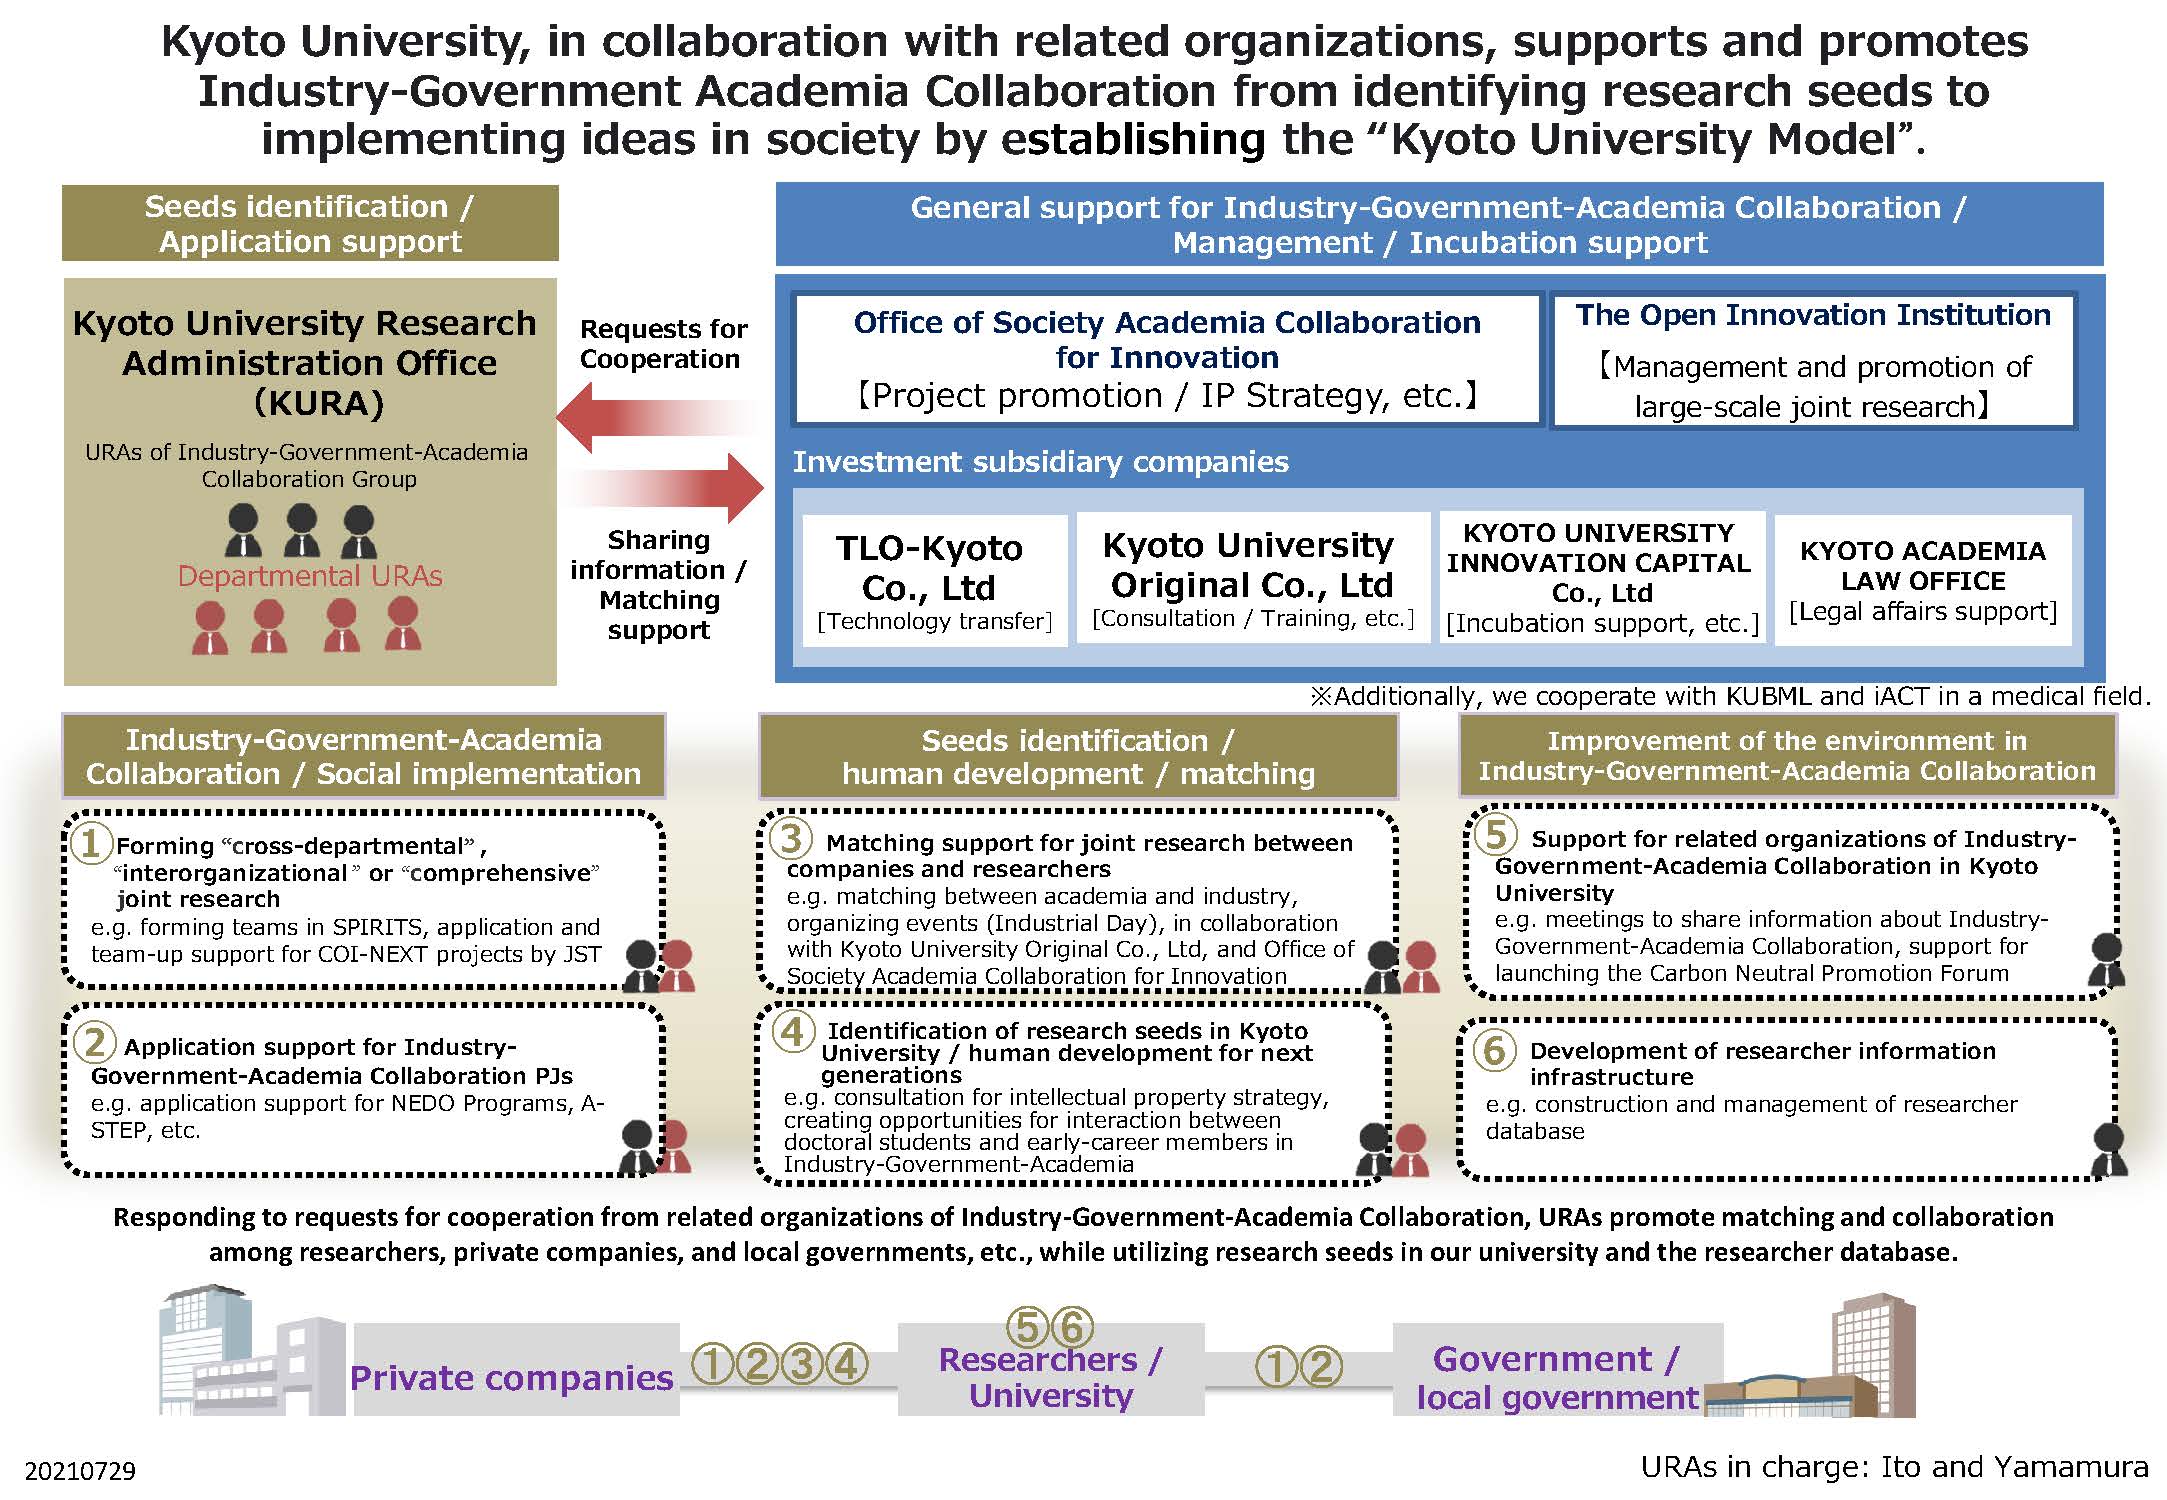 Industry-Government-Academia Collaboration